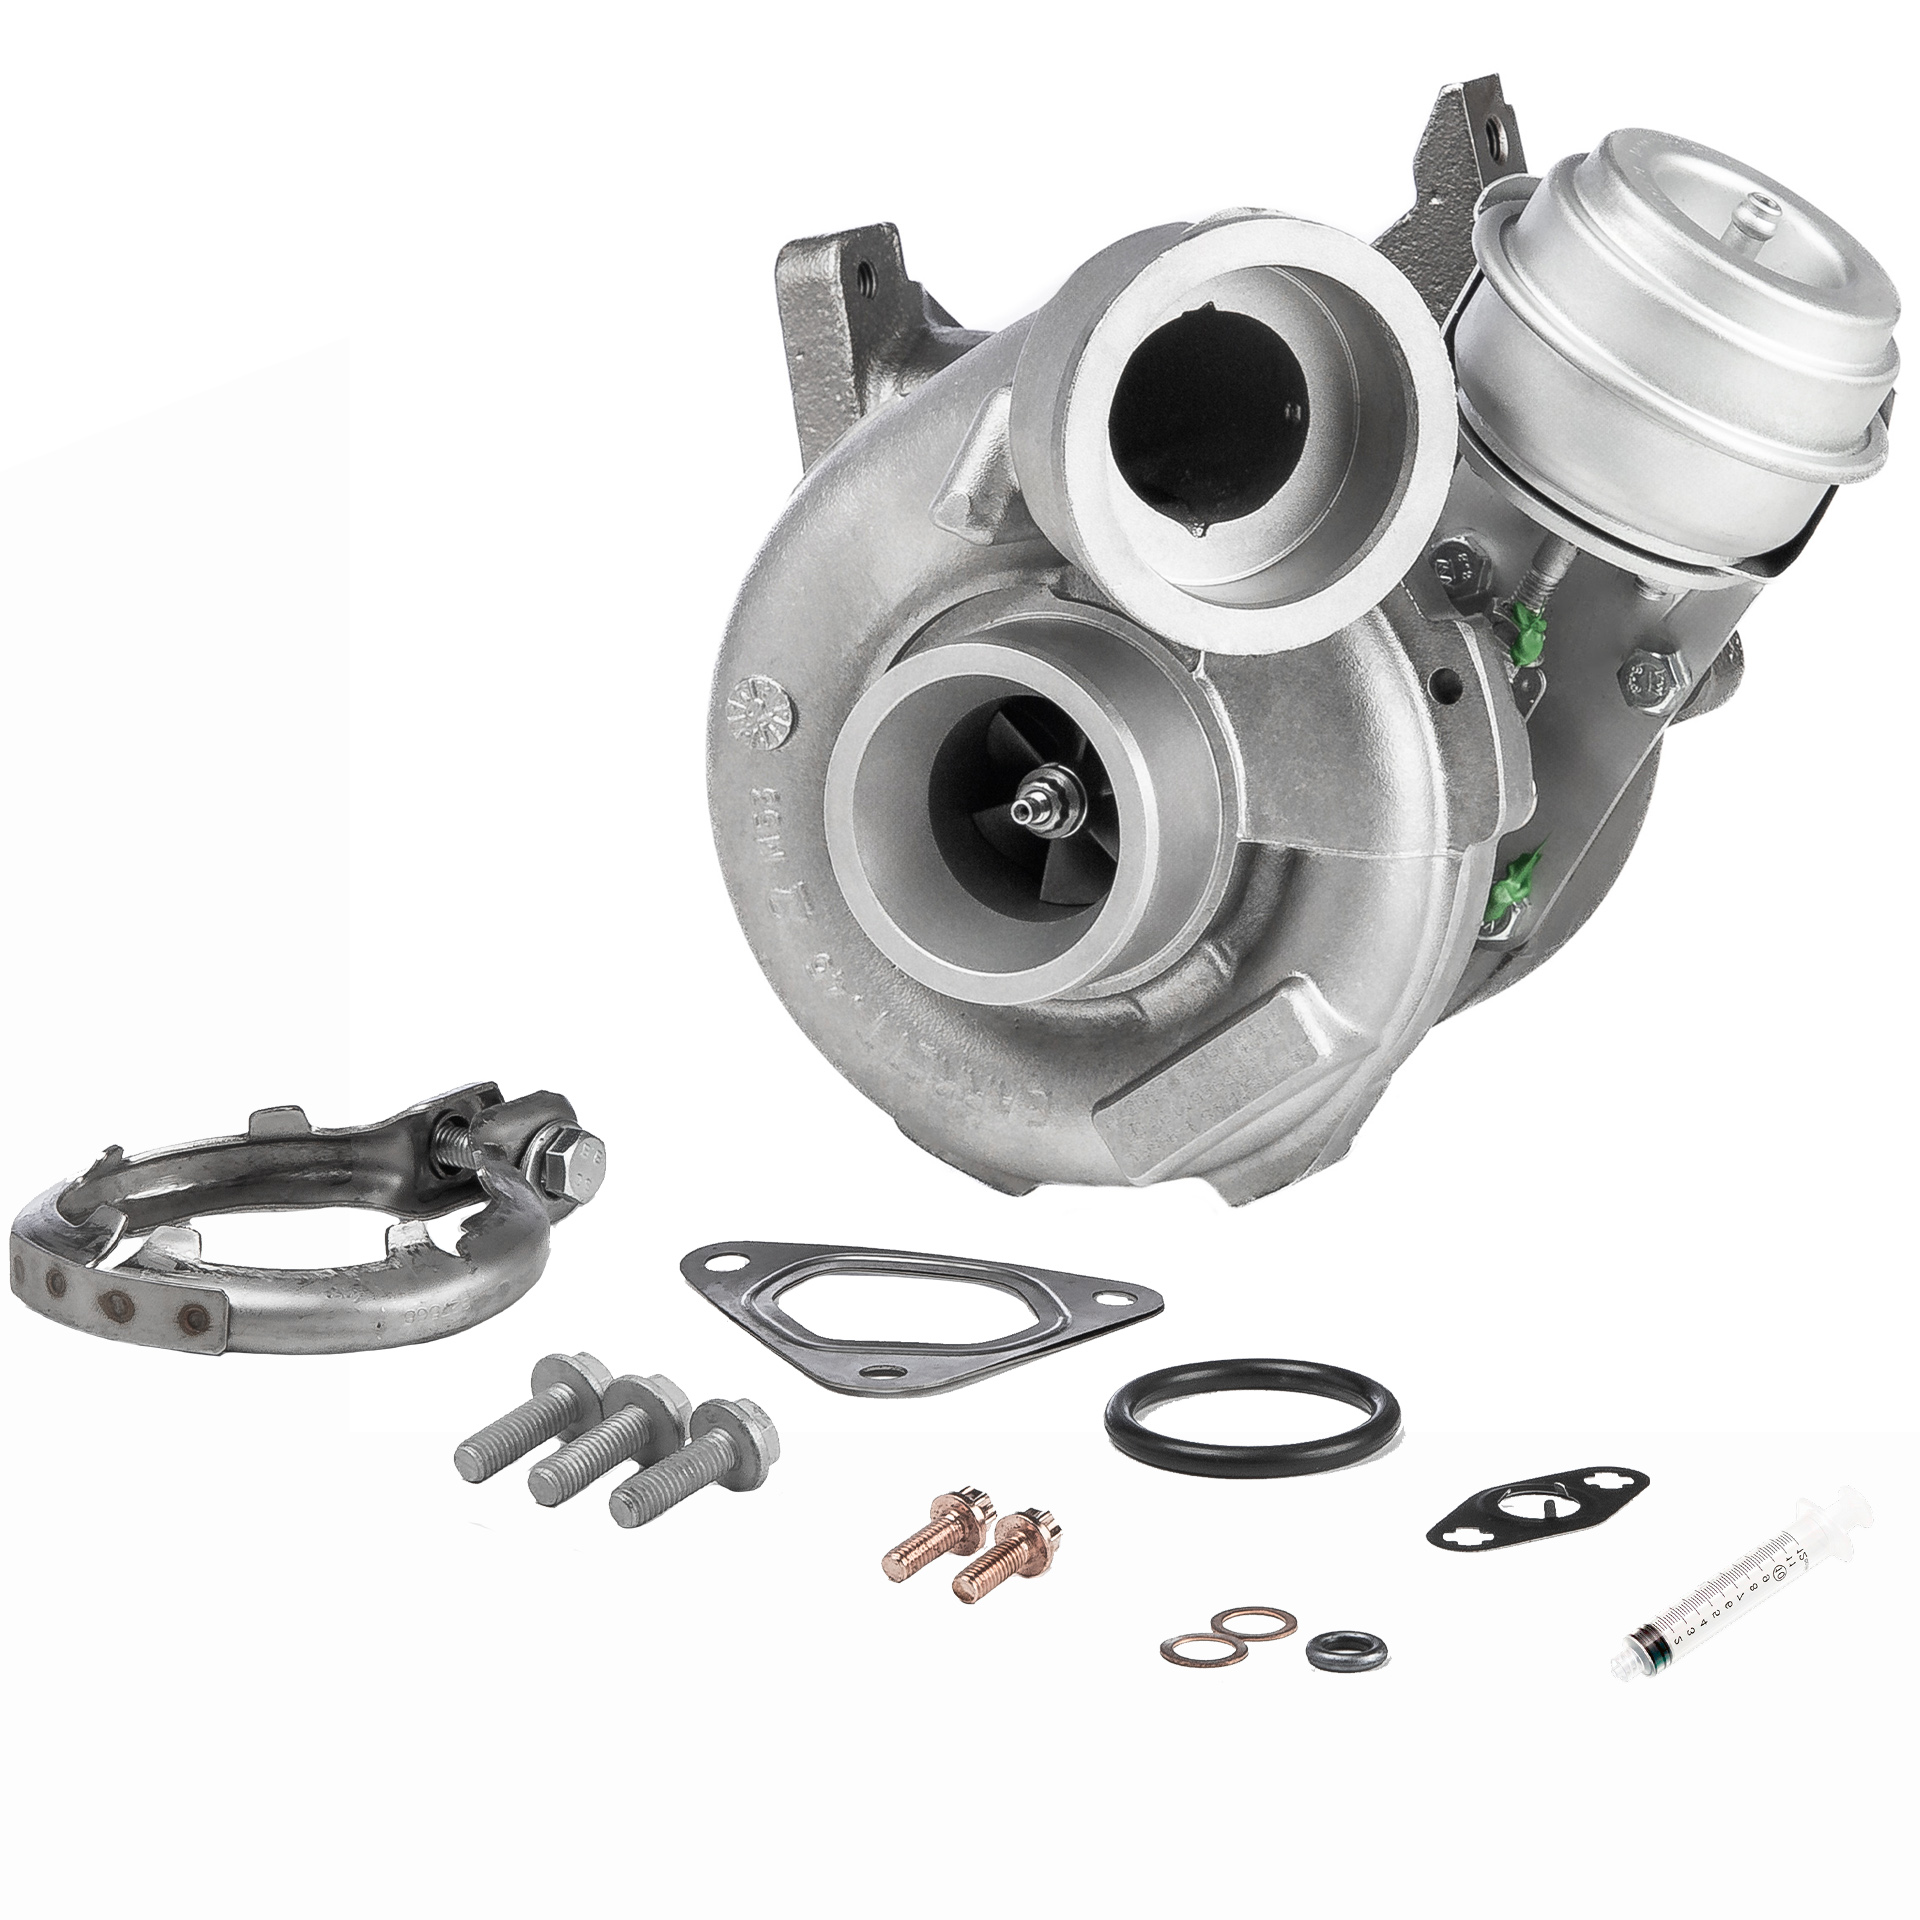 BR Turbo Turbo, with attachment material Turbo 709836-5001RSM buy